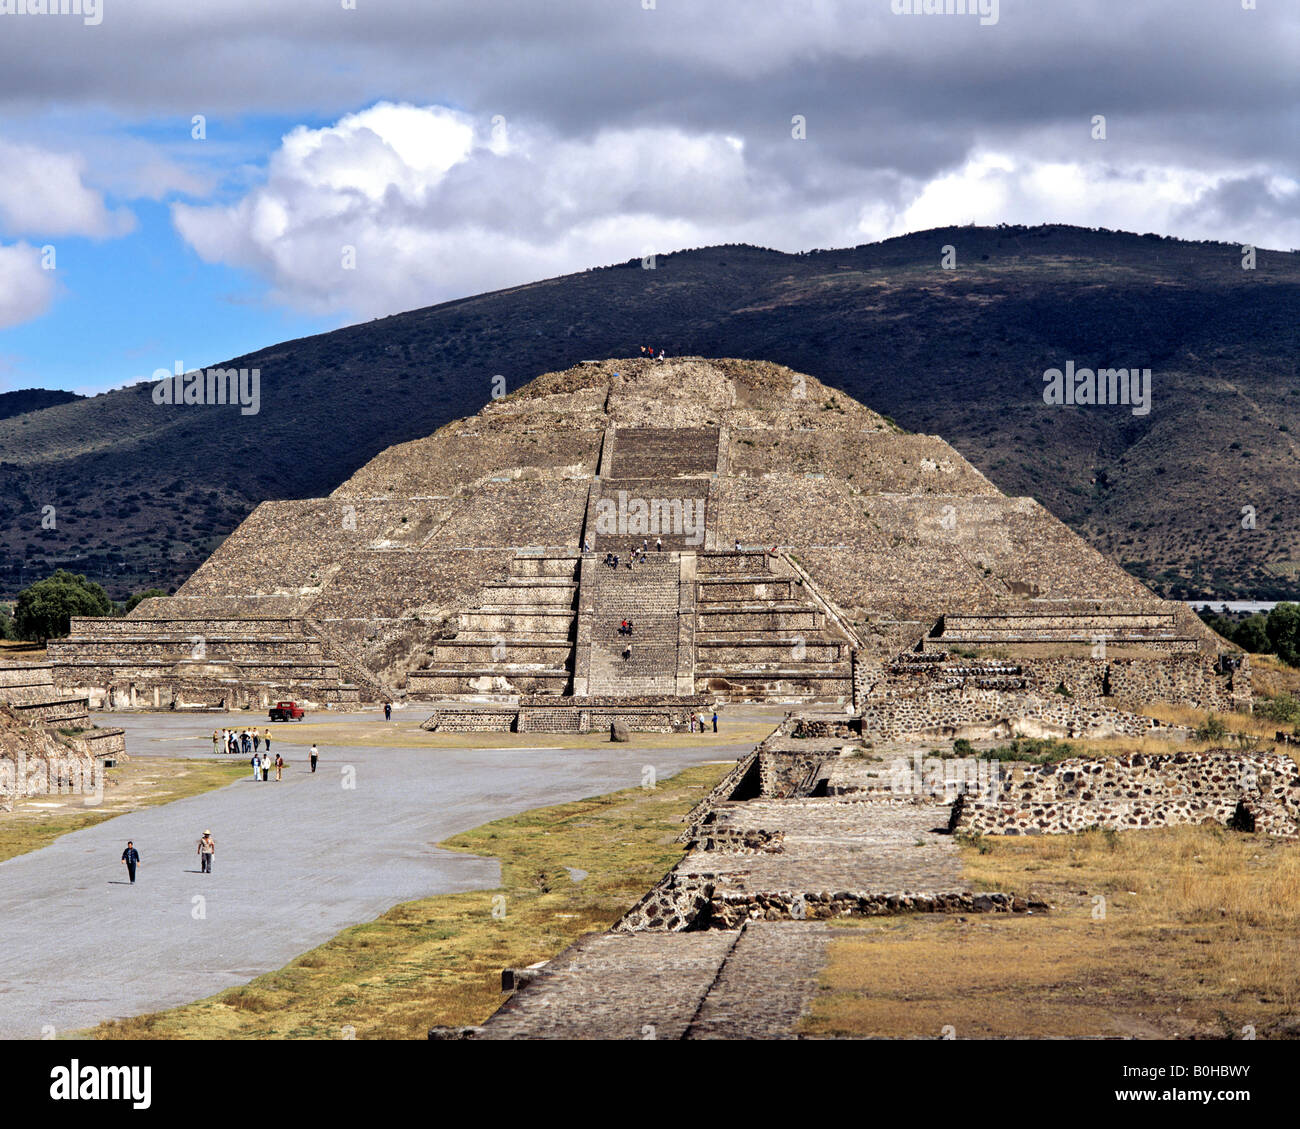 Pyramid of the Moon in Teotihuacan, Aztec civilization near Mexico City, Mexico, Central America Stock Photo